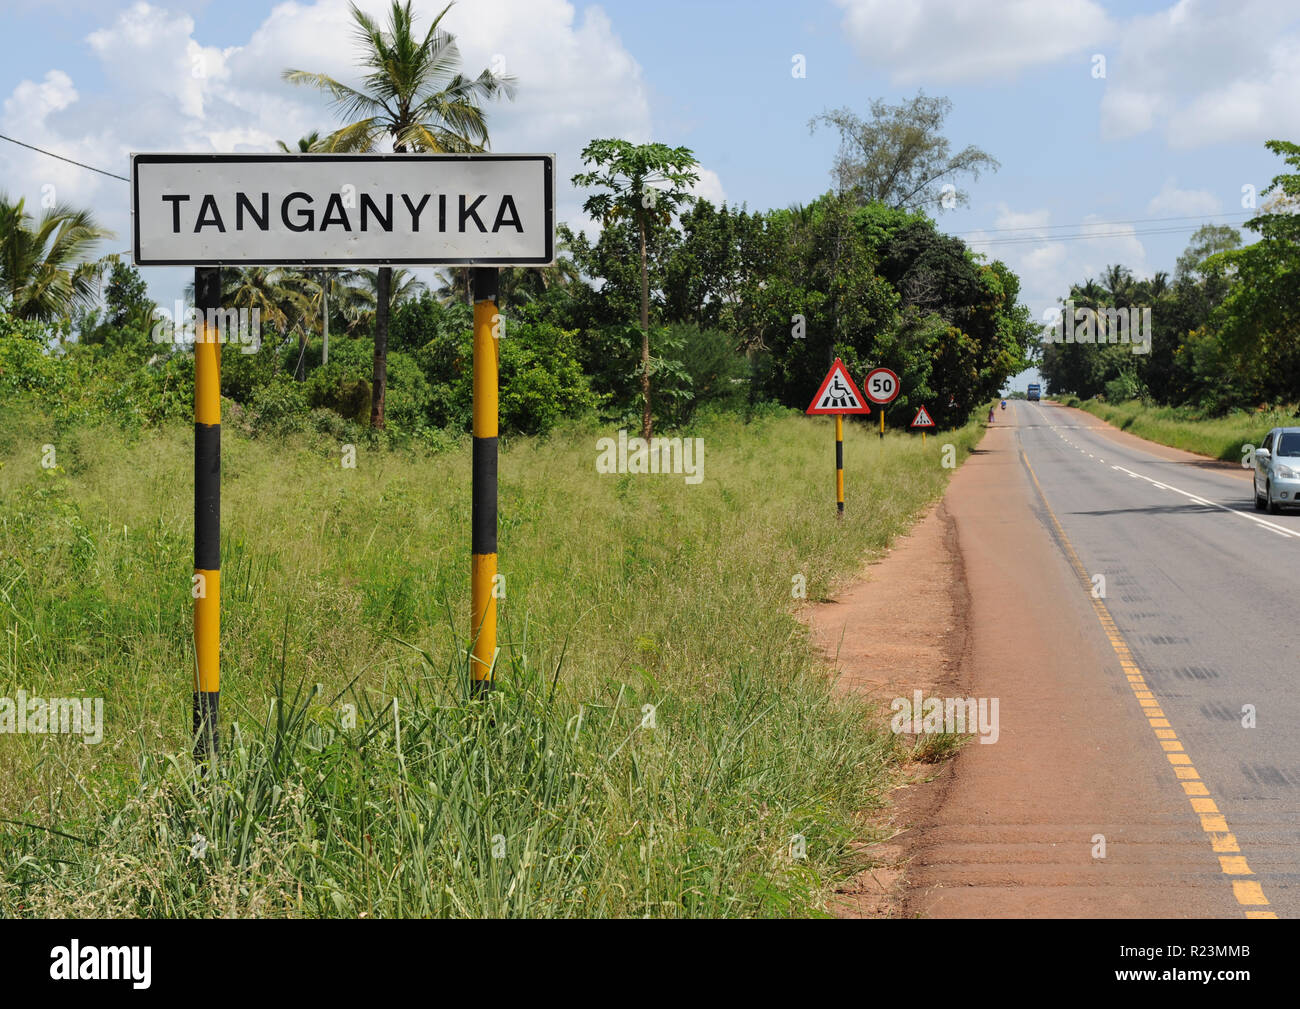 Tanganyika, Tanzania before independence, is now name of new village in Tanga Region on Highway A14-B1 part of Great North Road resurfaced by Chinese. Stock Photo